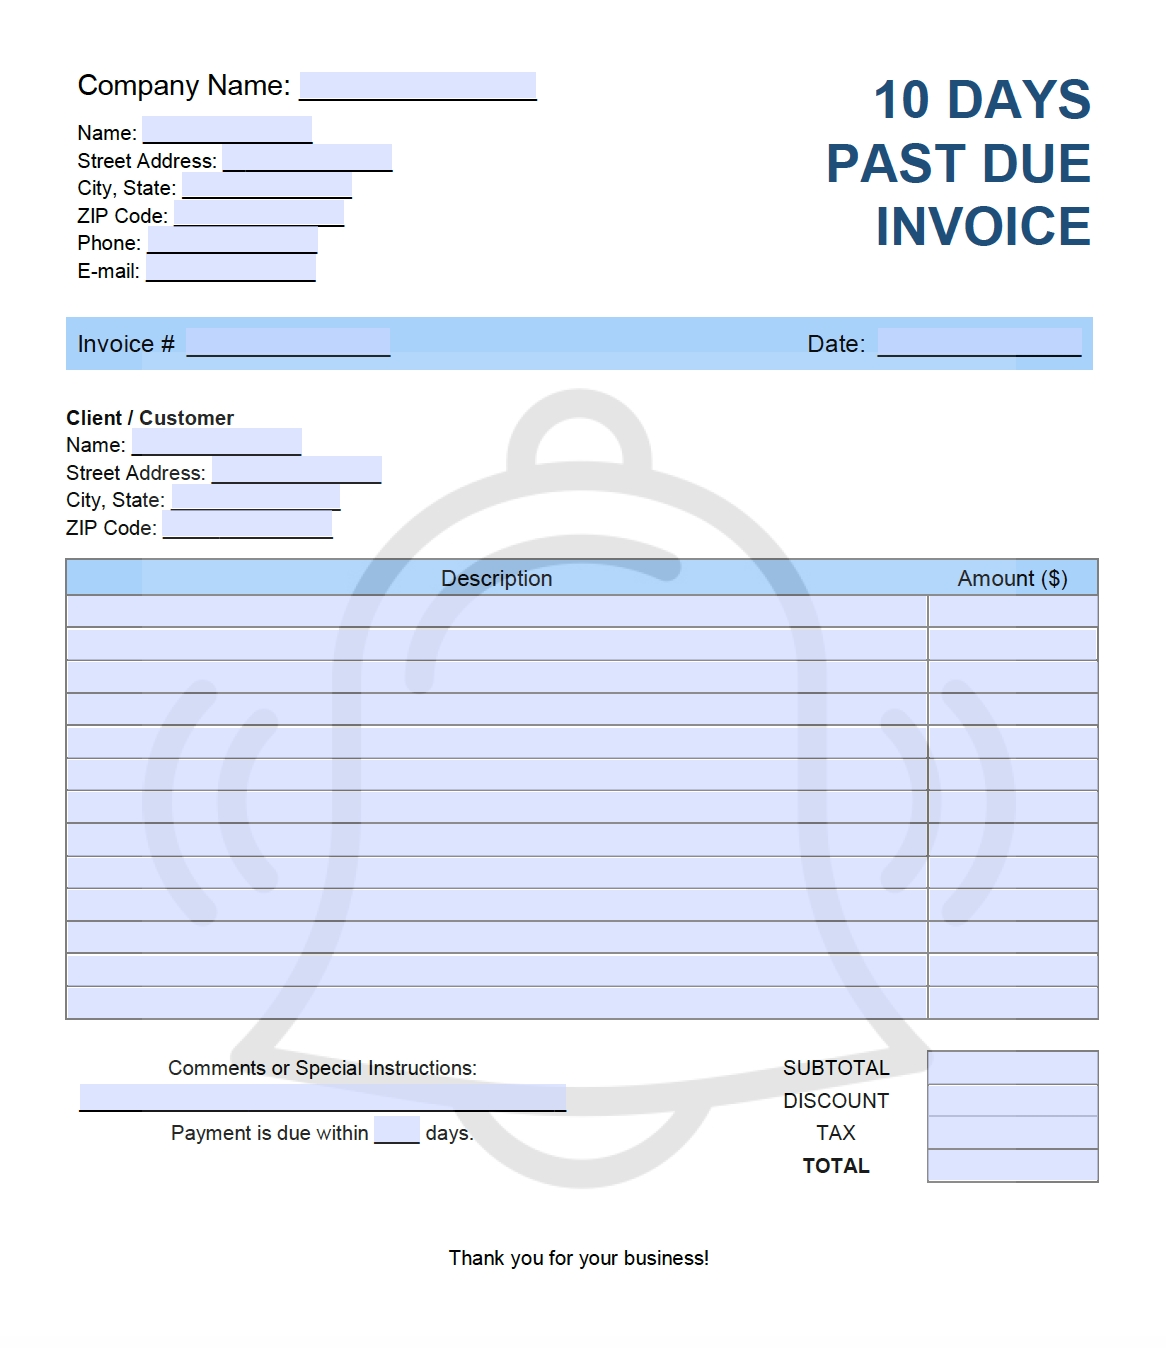 Free Ten (10) Days Past Due Invoice Template | Pdf | Word